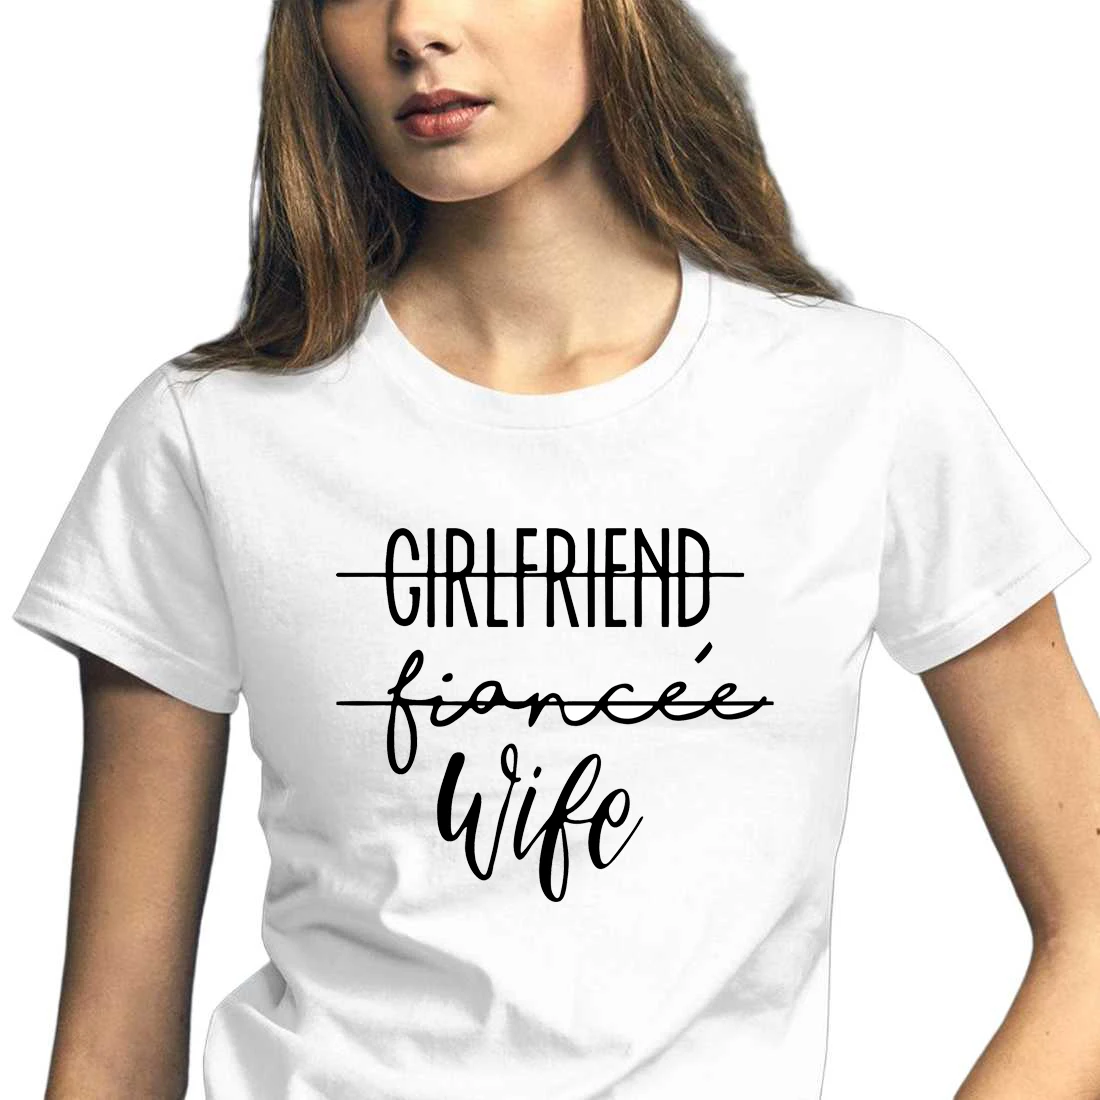 

Girlfriend Fiance Wife T-Shirt Future Mrs Tumblr Tee Engagement Gift Fiance Shirt Bachelorette Party Tops Trendy Casual Tshirts